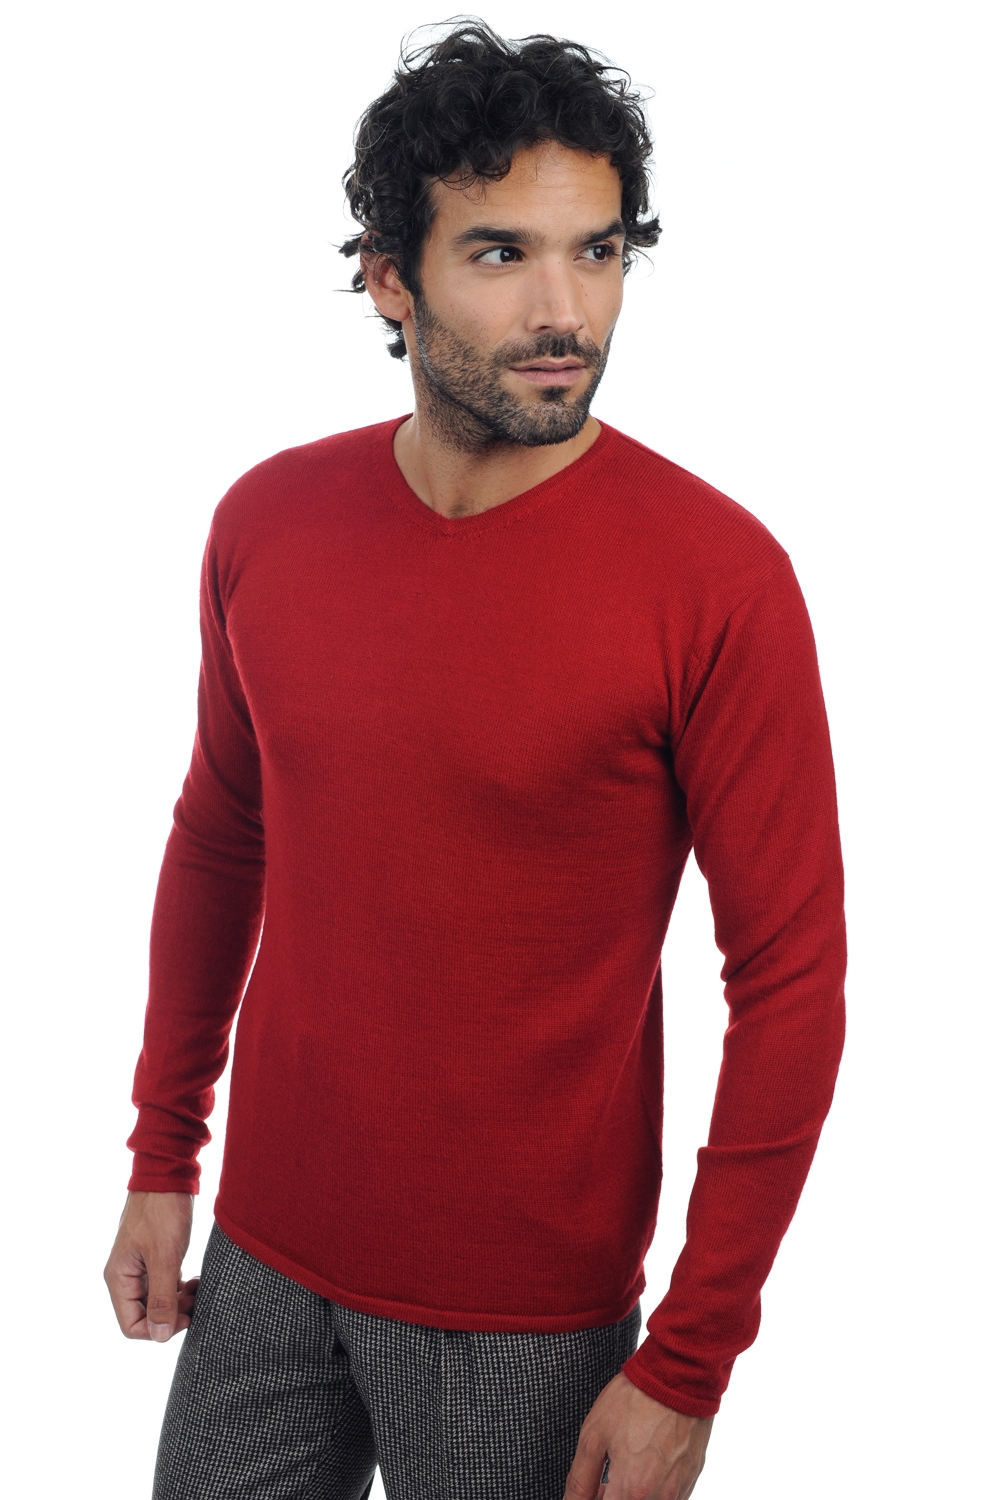 Baby Alpaga pull homme col v ethan rouge xs